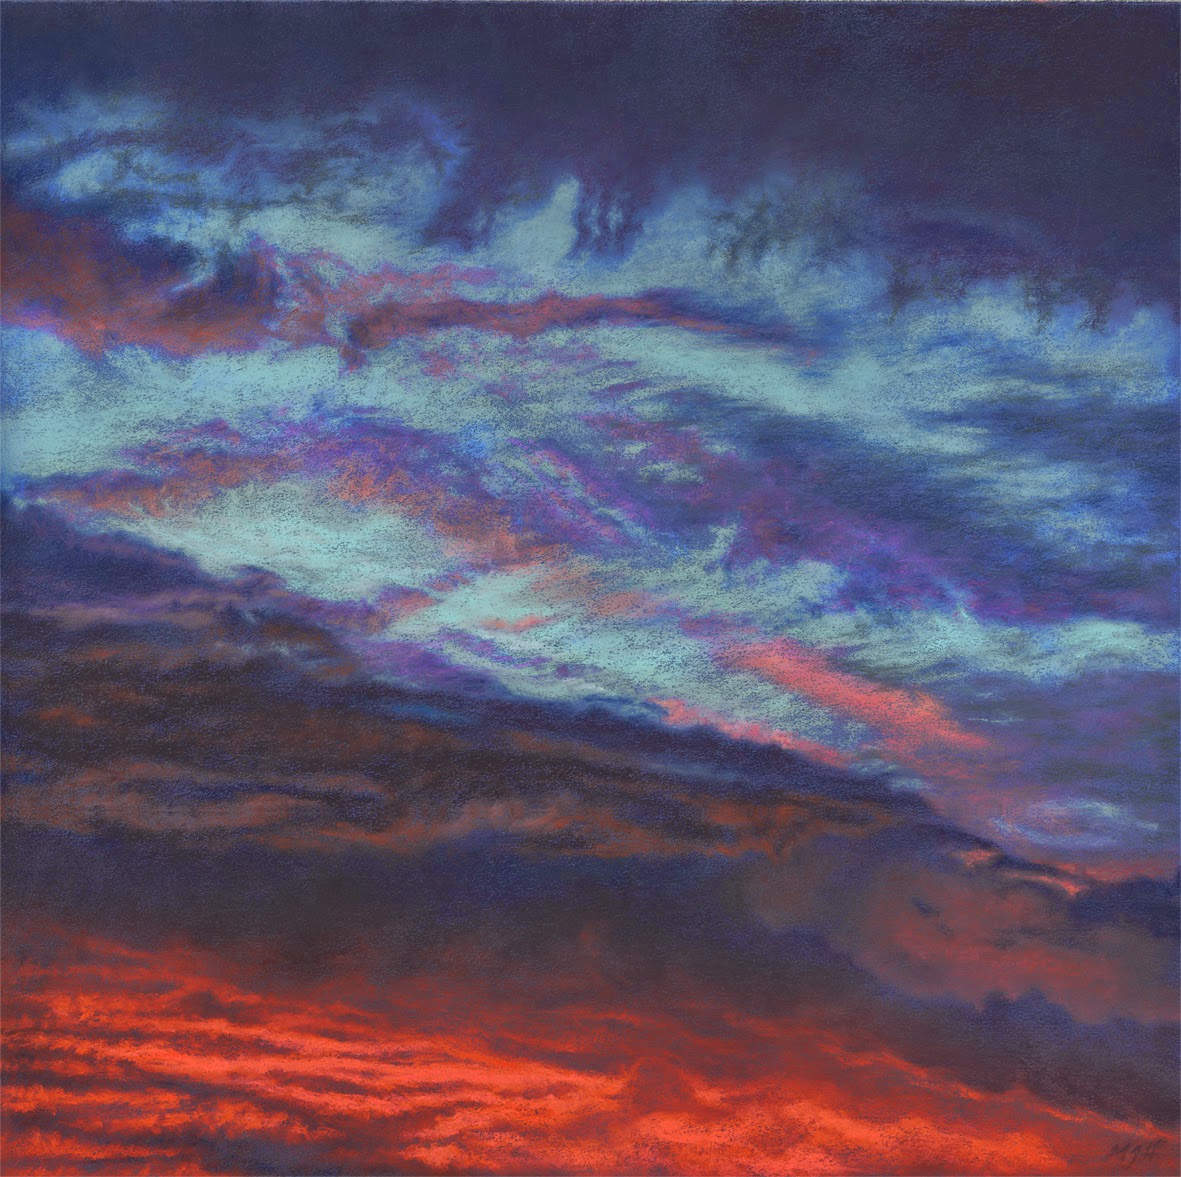 Red & Blue Sky-Michael Howley Artist. A signed limited edition print from an original soft pastel painting